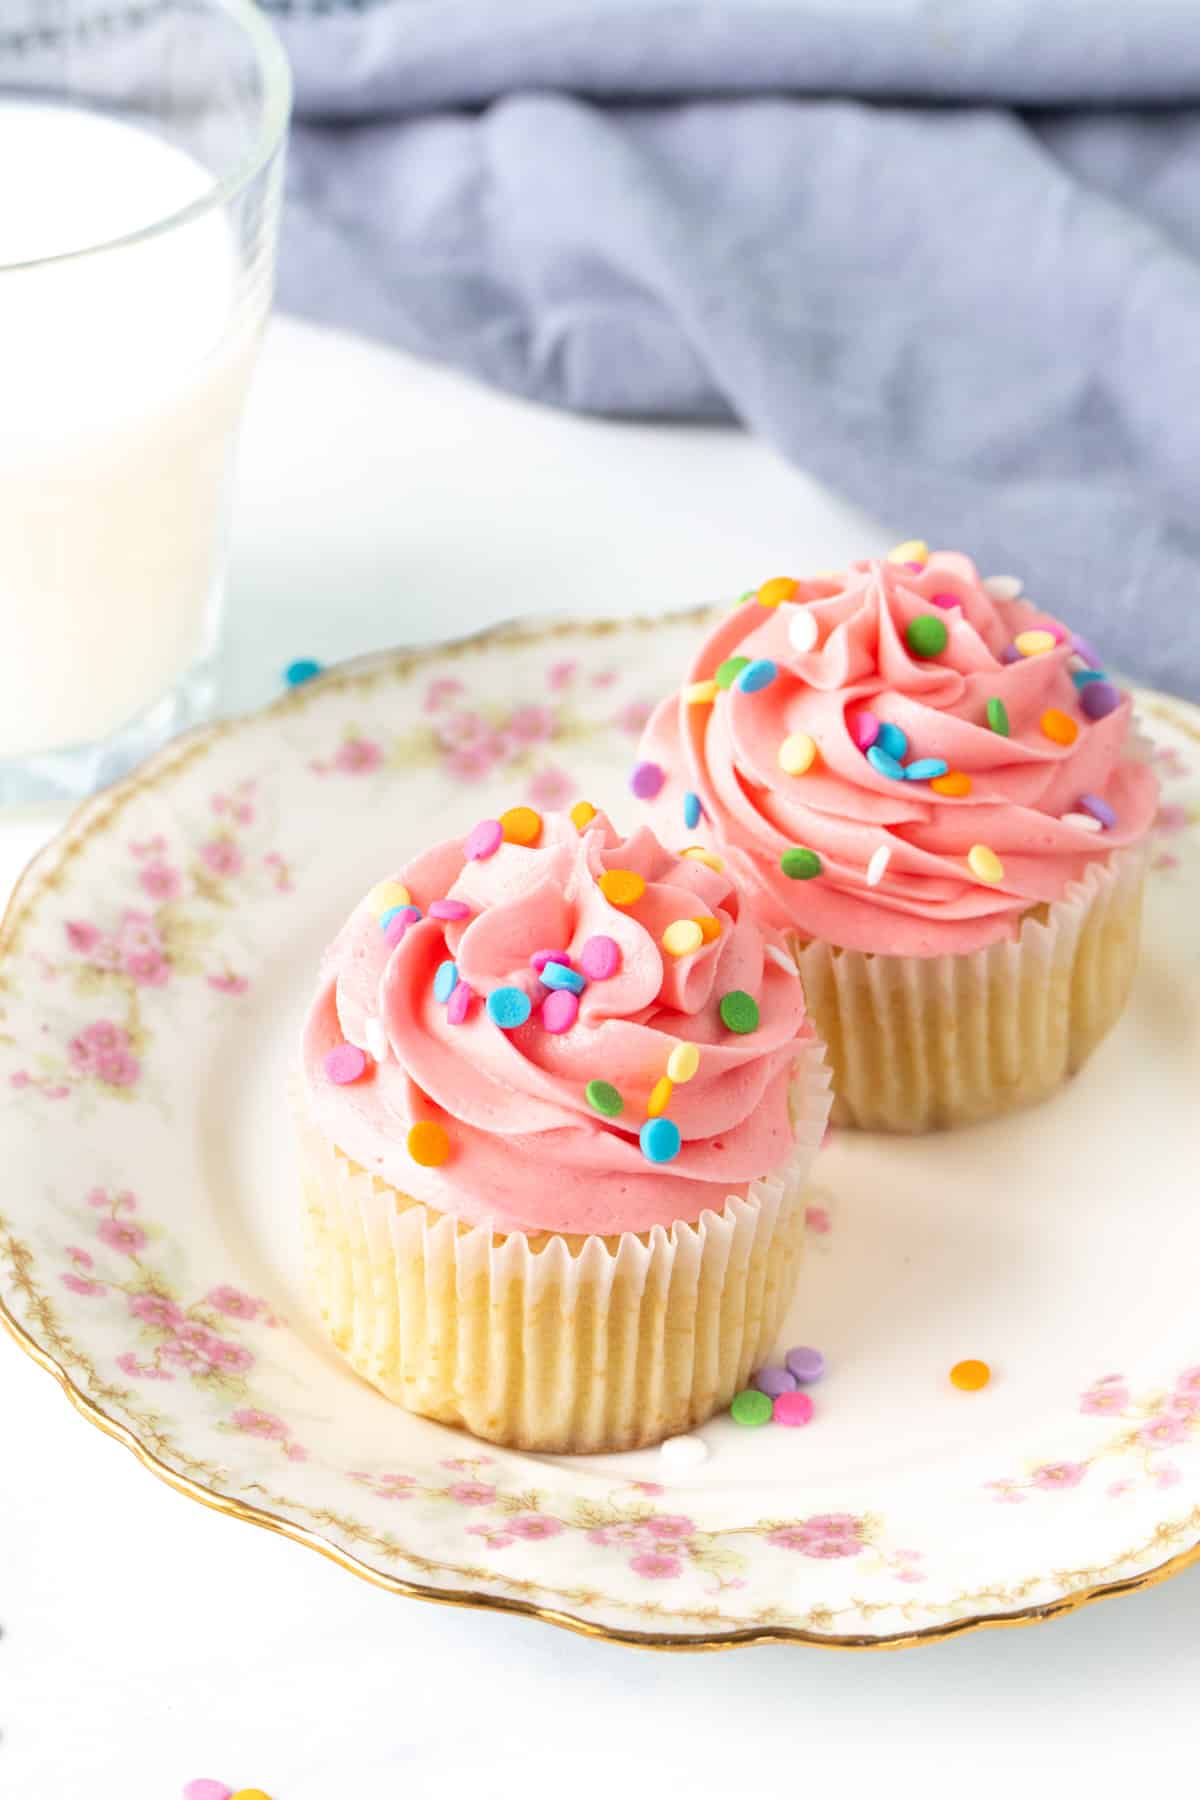 Vanilla cupcakes for two on a plate with glass of milk